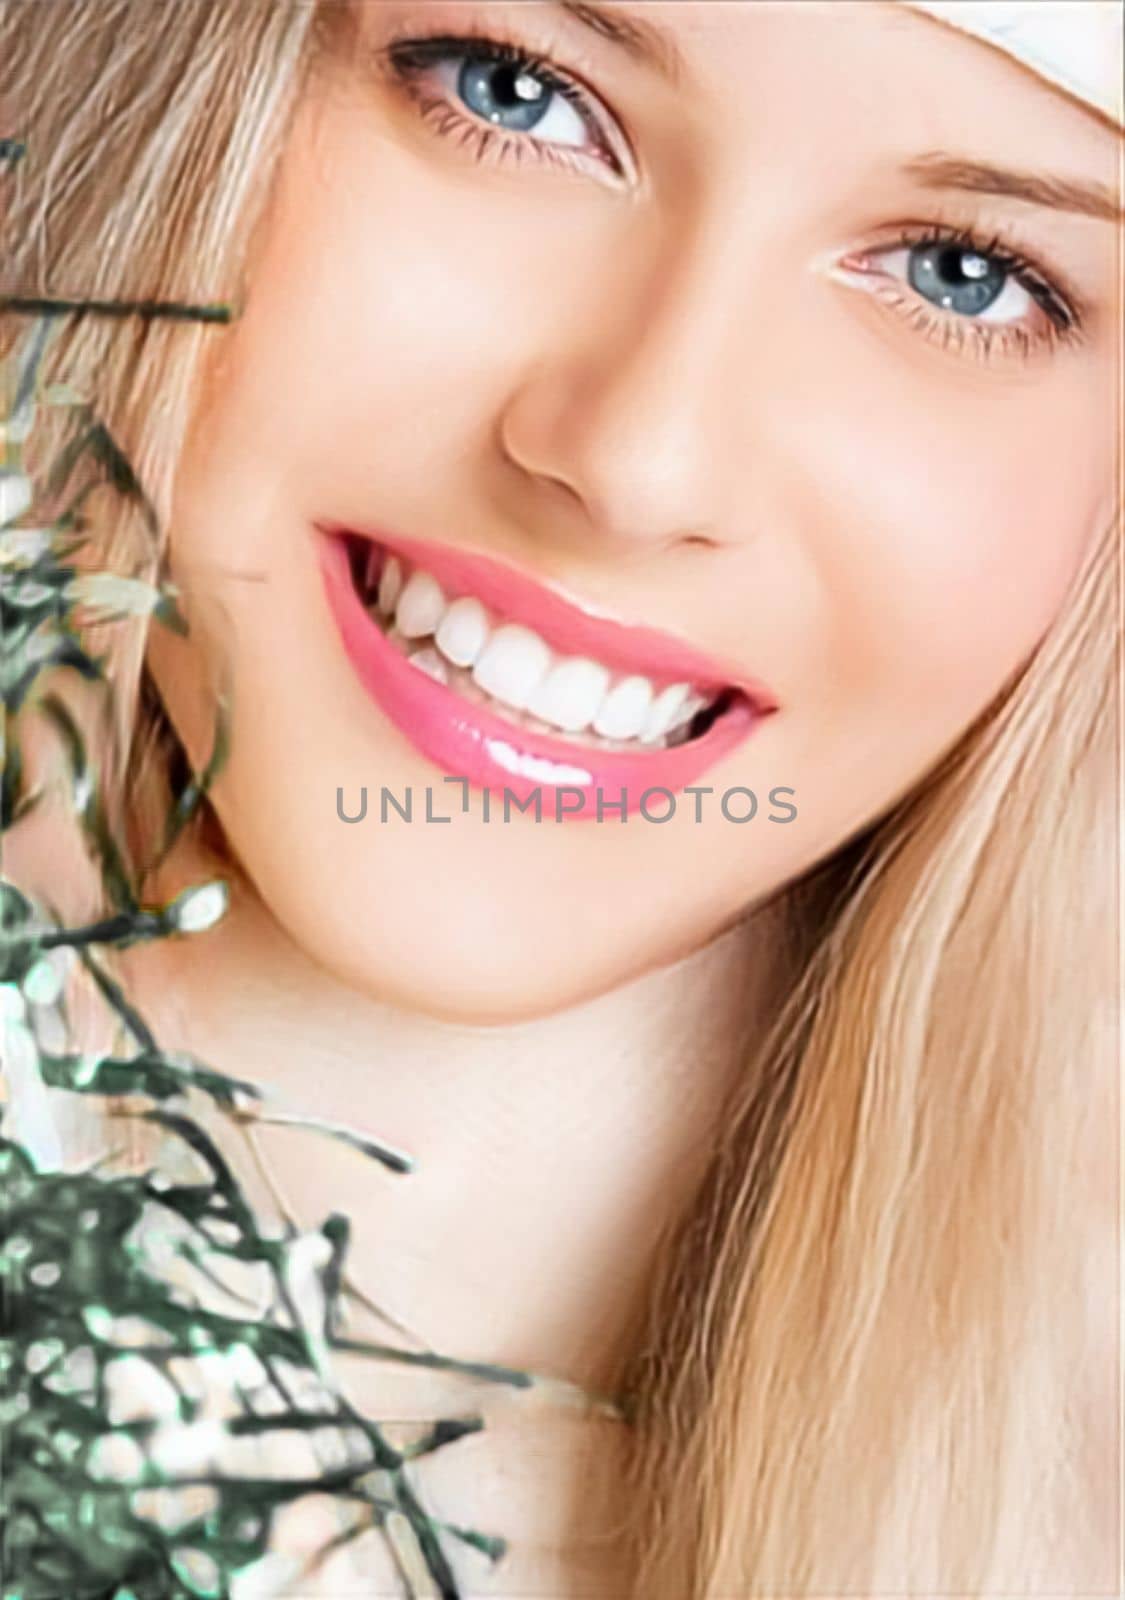 Merry Christmas, happy holidays and woman wearing white benny hat for celebration, beauty and fashion. Portrait of beautiful blonde girl smiling and enjoying Christmas, New Year and winter holidays.